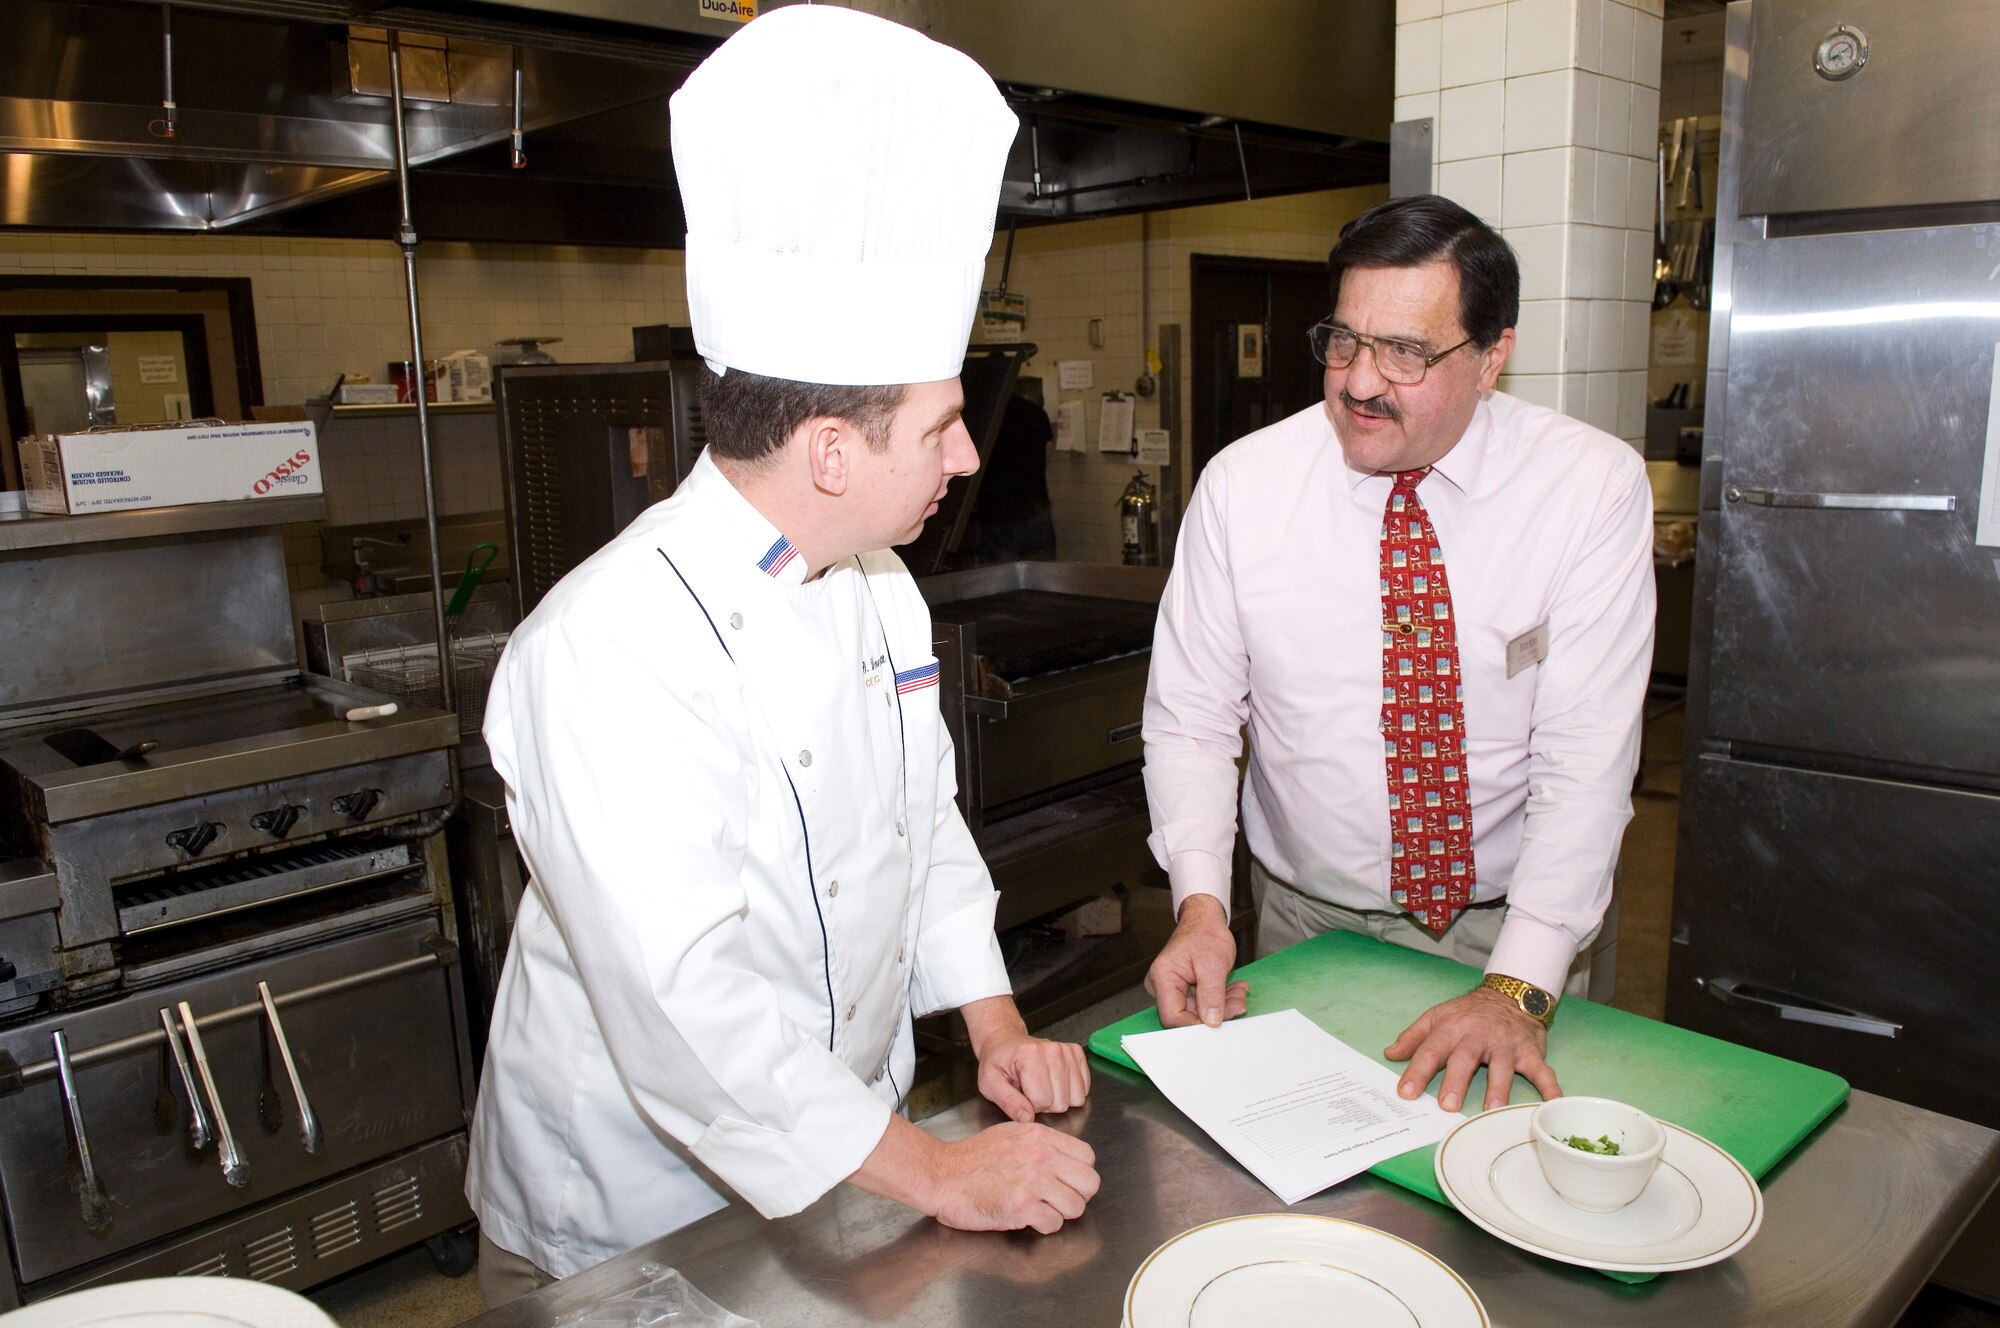 Senior Master Sgt. Mark Veomett and Minuteman Club Manager Dave Bovio review menu options for the Jan. 16 evening of gourmet dining at the club.  Limited tickets are available. (USAF photo by Rick Berry)